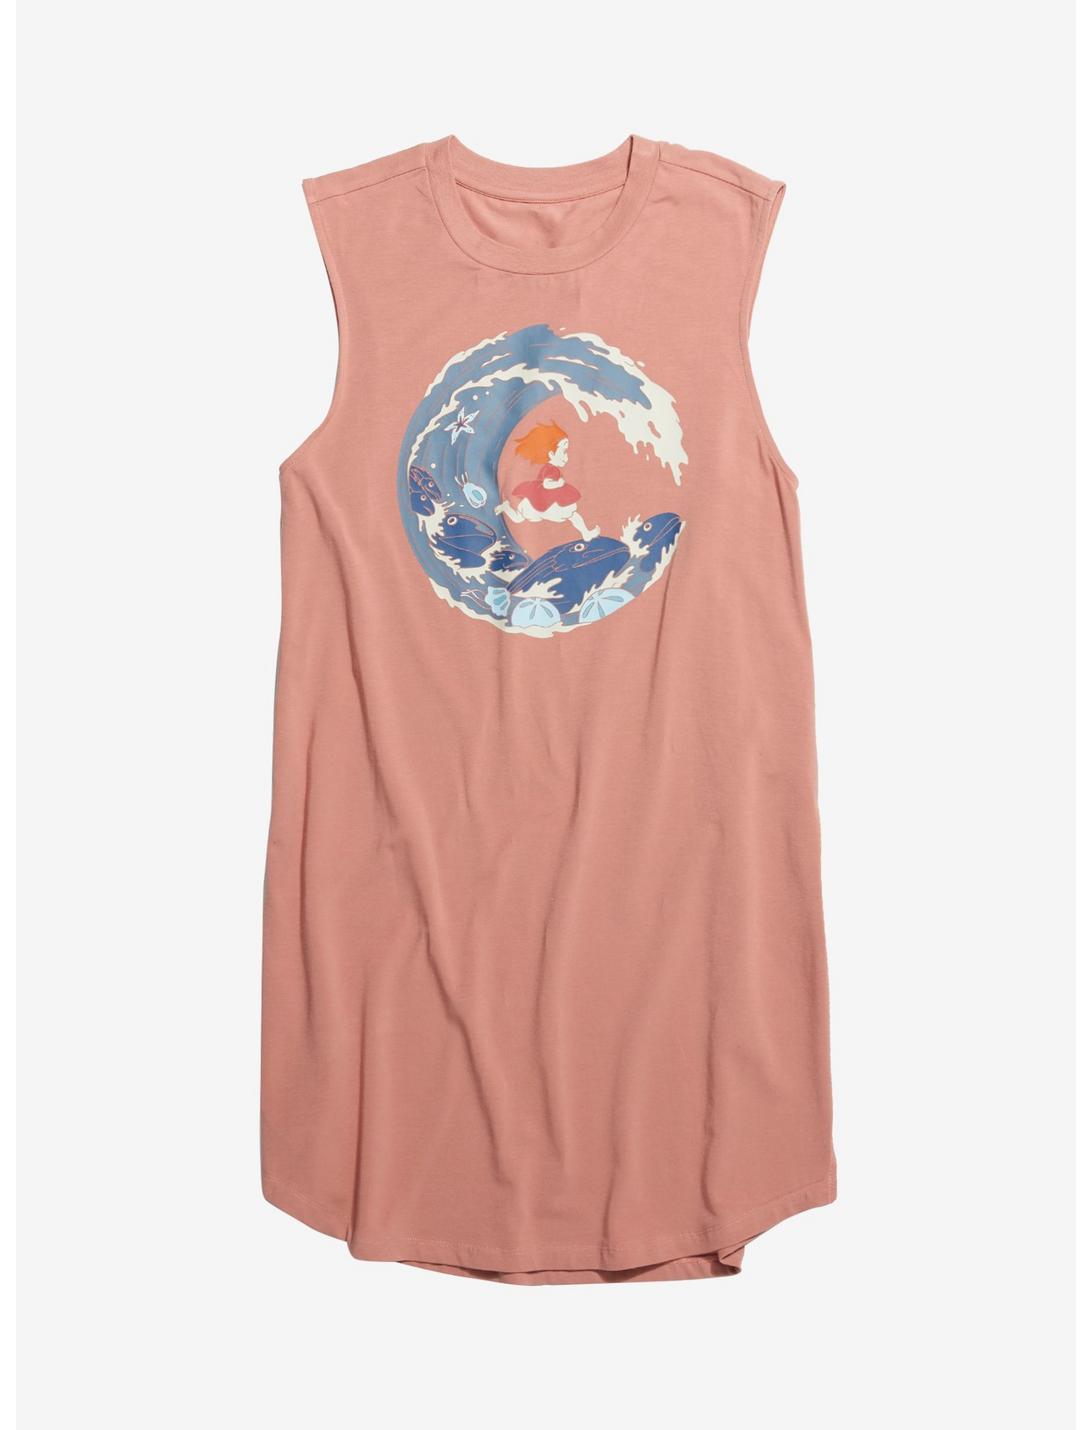 Her Universe Studio Ghibli Earth Day Collection Ponyo Wave Walker Girls Tank Dress, CORAL, hi-res